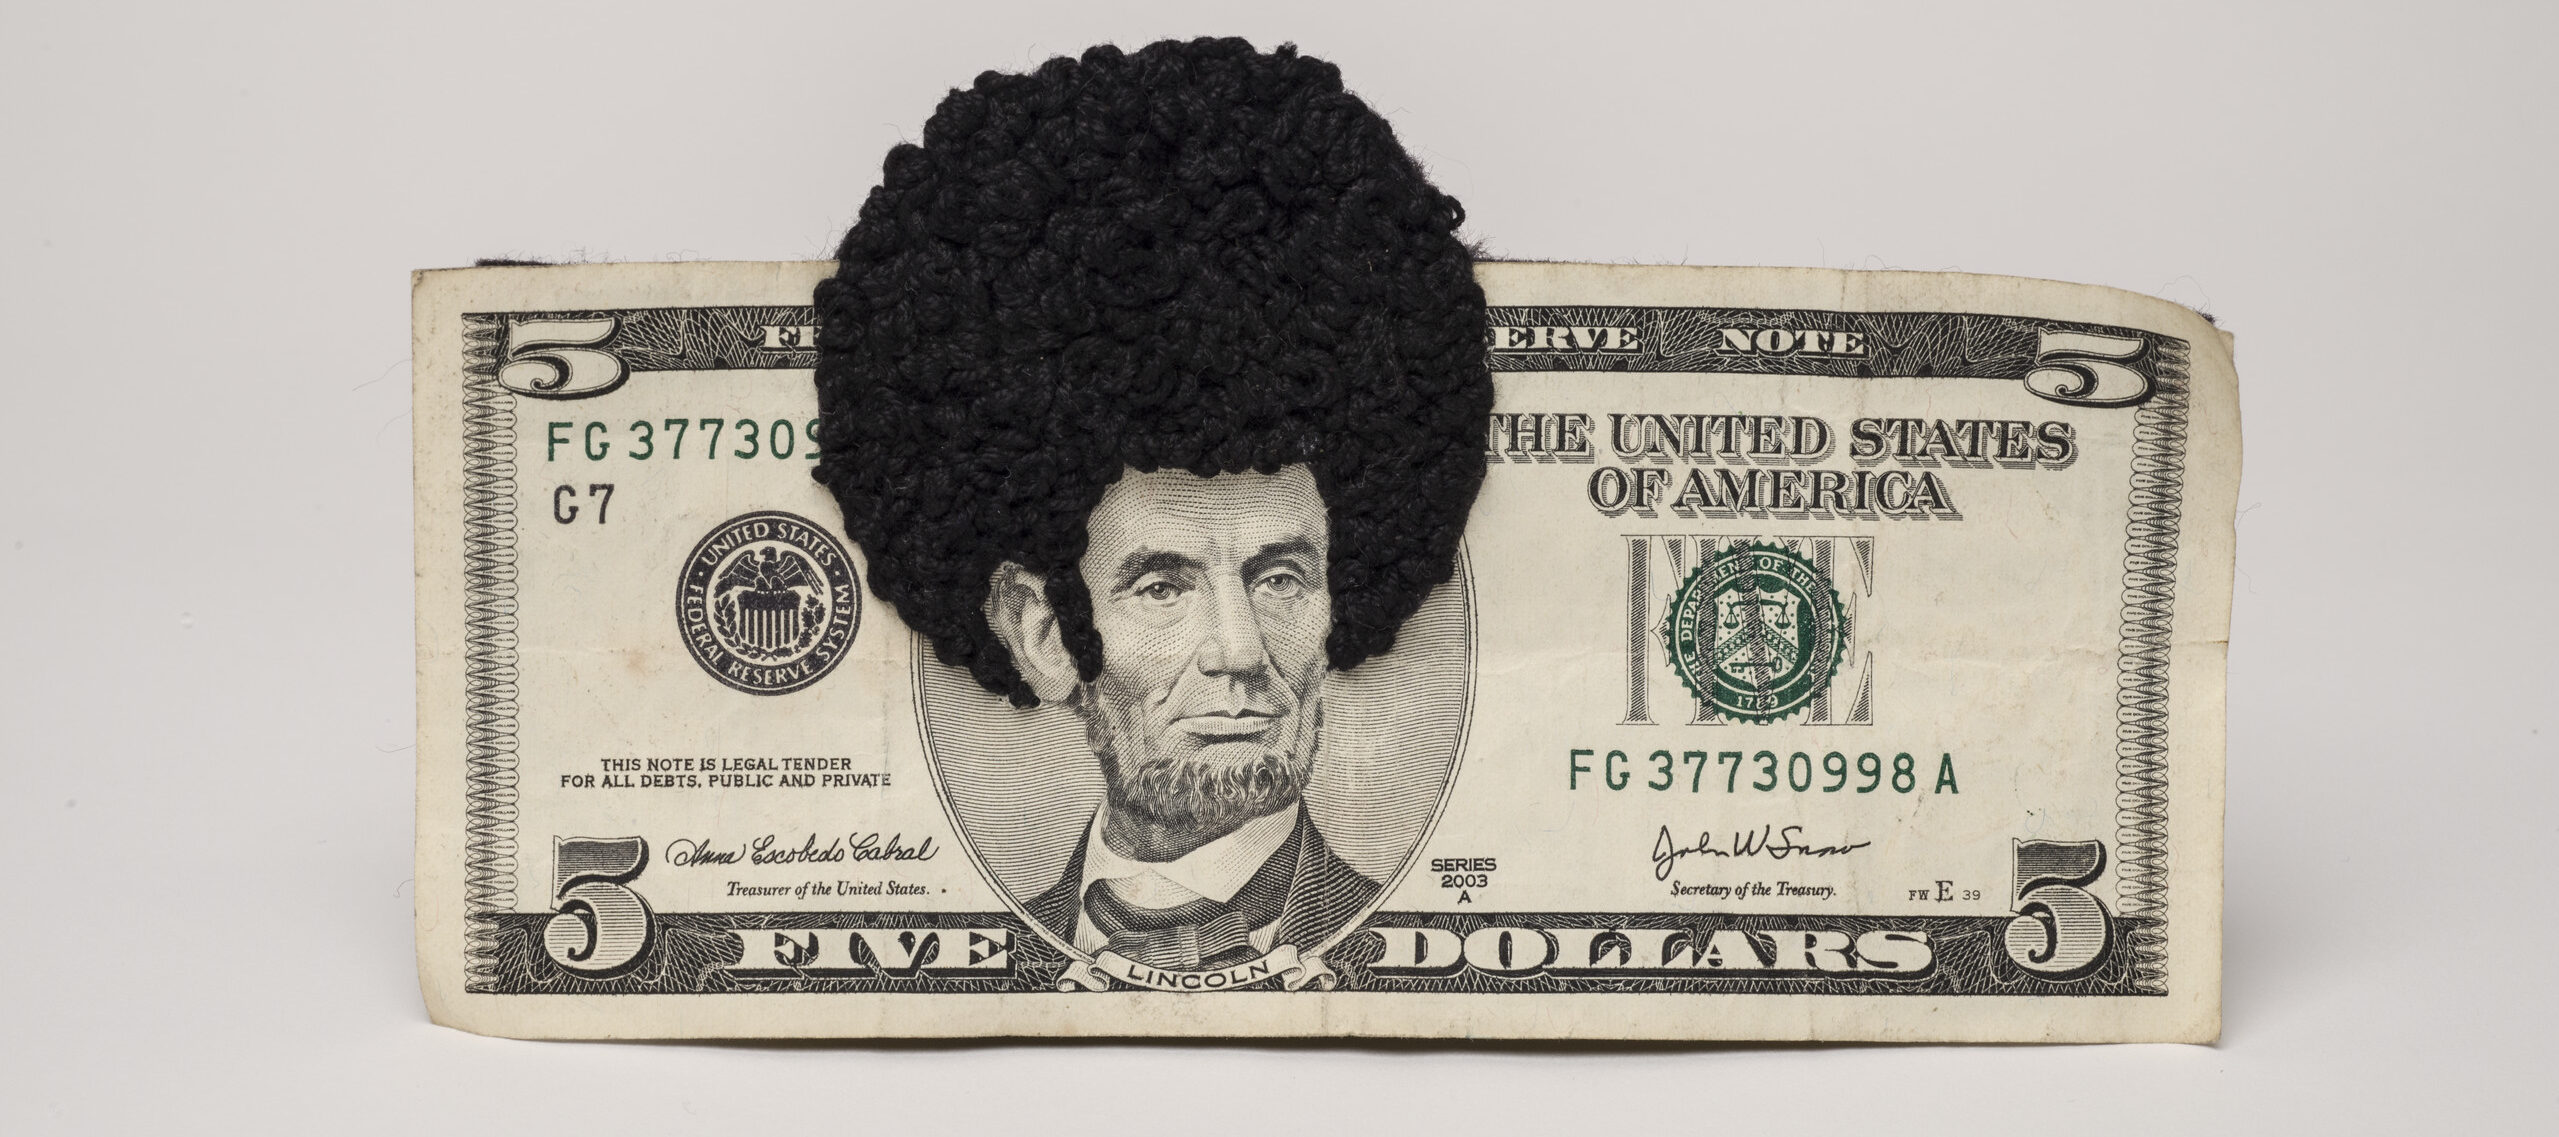 Sonya Clark, <i>Afro Abe II</i>, 2012; Five-dollar bill and hand-embroidered thread, 4 x 6 in.; National Museum of Women in the Arts, Gift of Heather and Tony Podesta Collection; © Sonya Y.S. Clark; Photo by Lee Stalsworth”>

										<figcaption id=